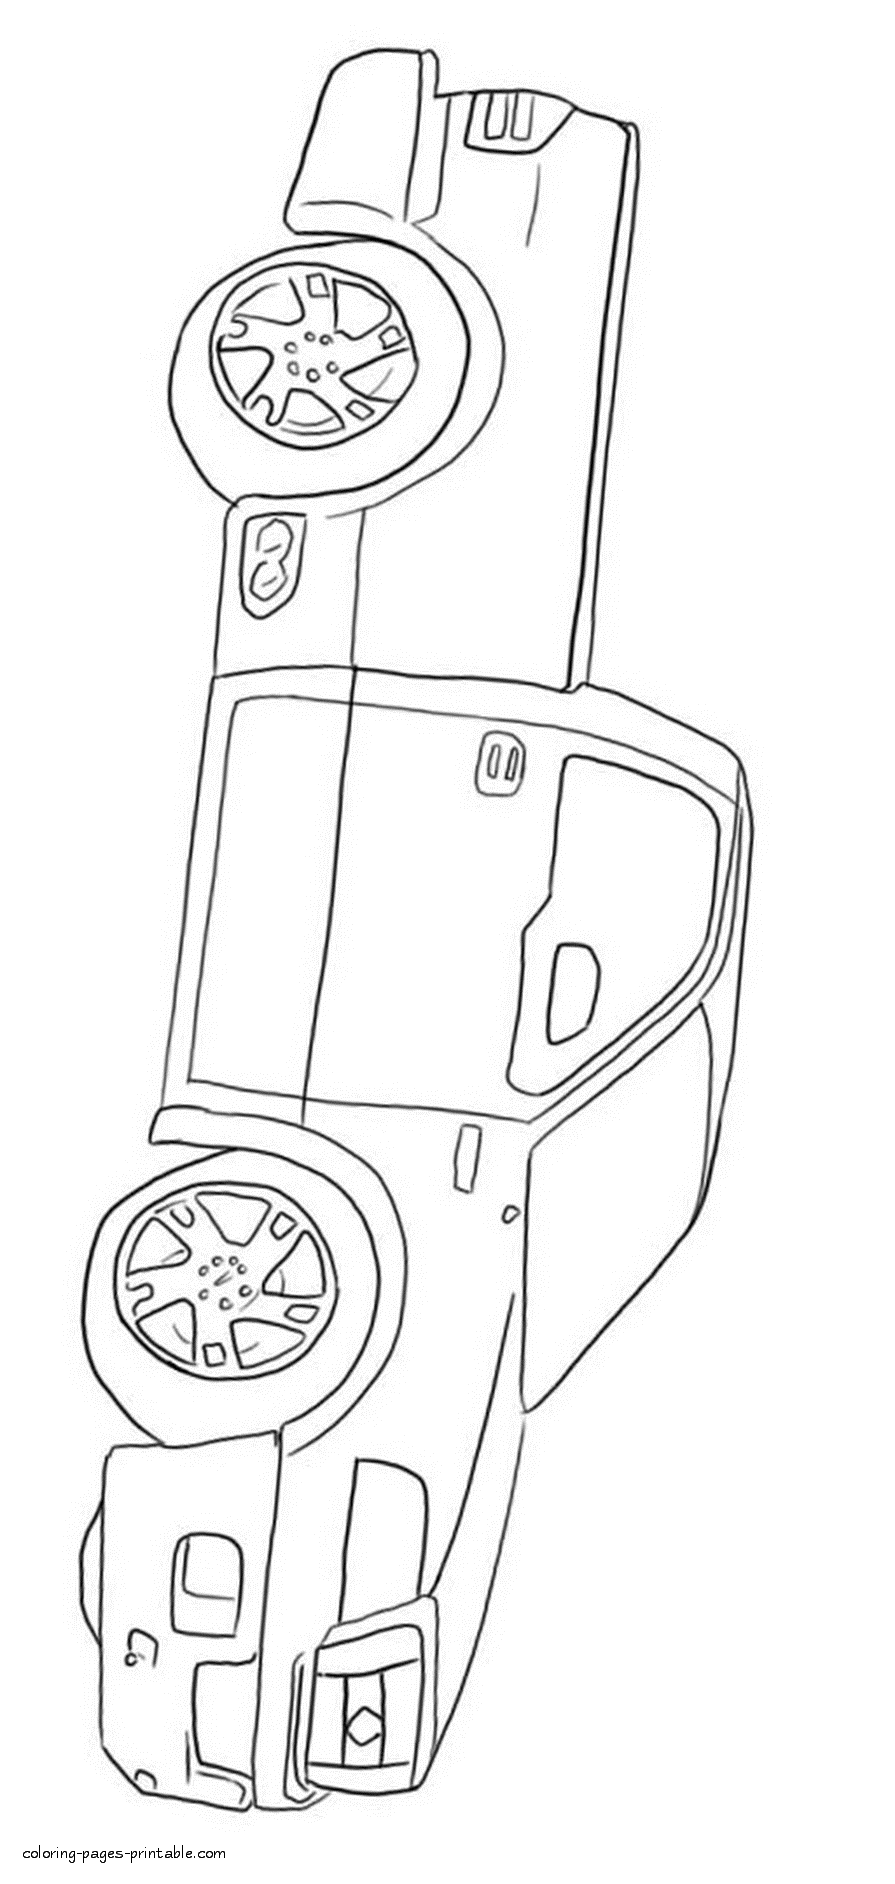 Colouring sheet of a pickup truck for free